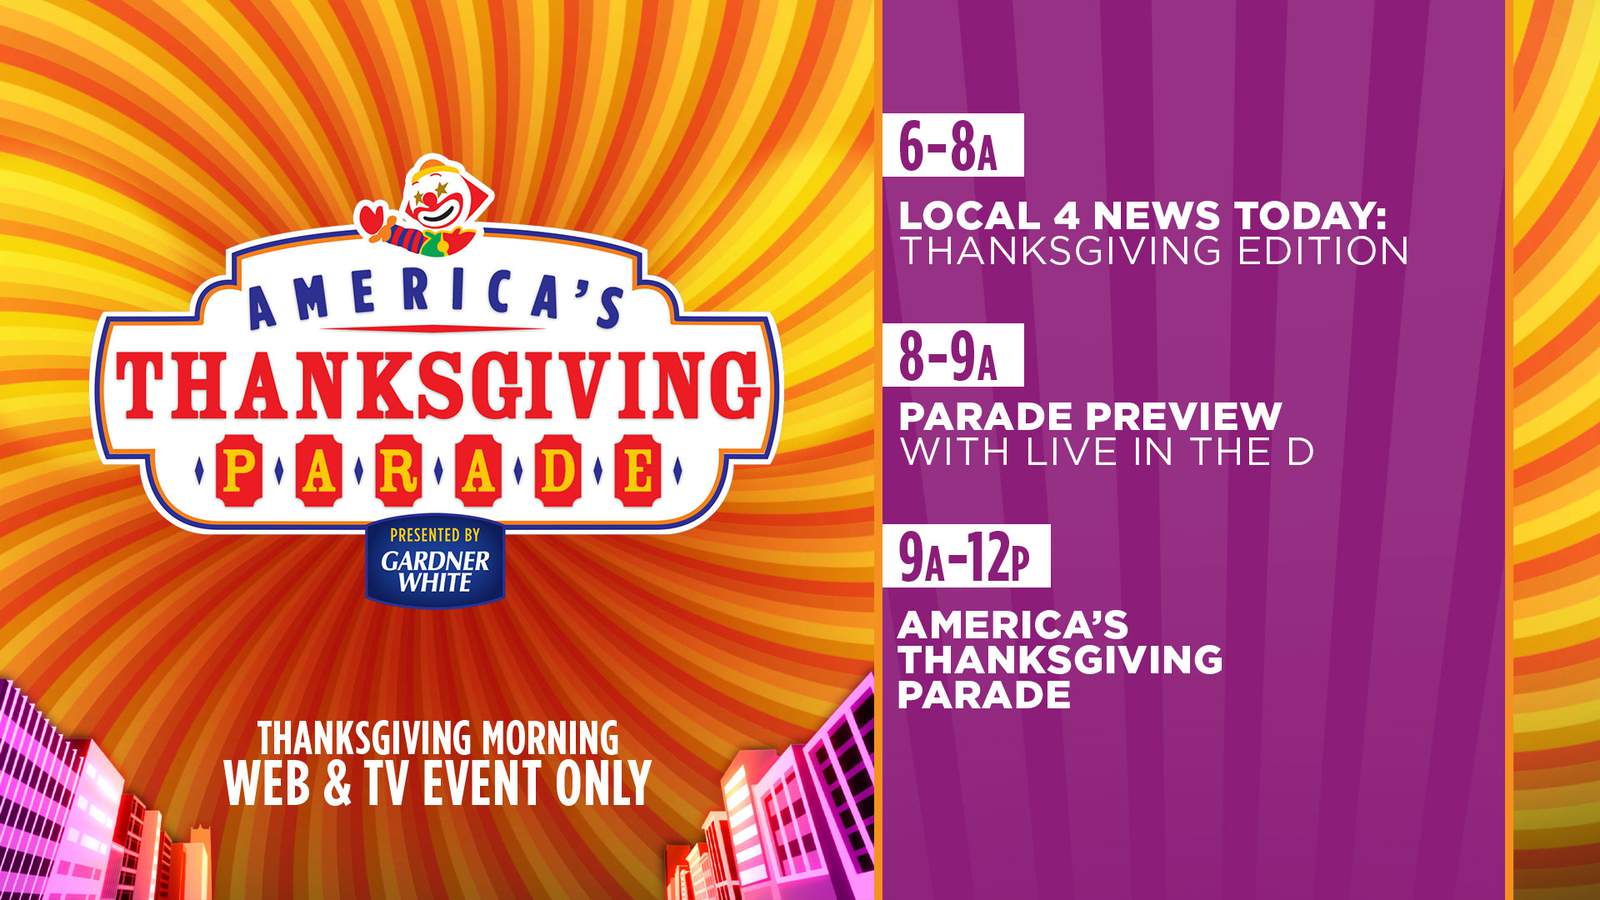 2020 ‘America’s Thanksgiving Parade’ will be virtual televised and online-only event this year